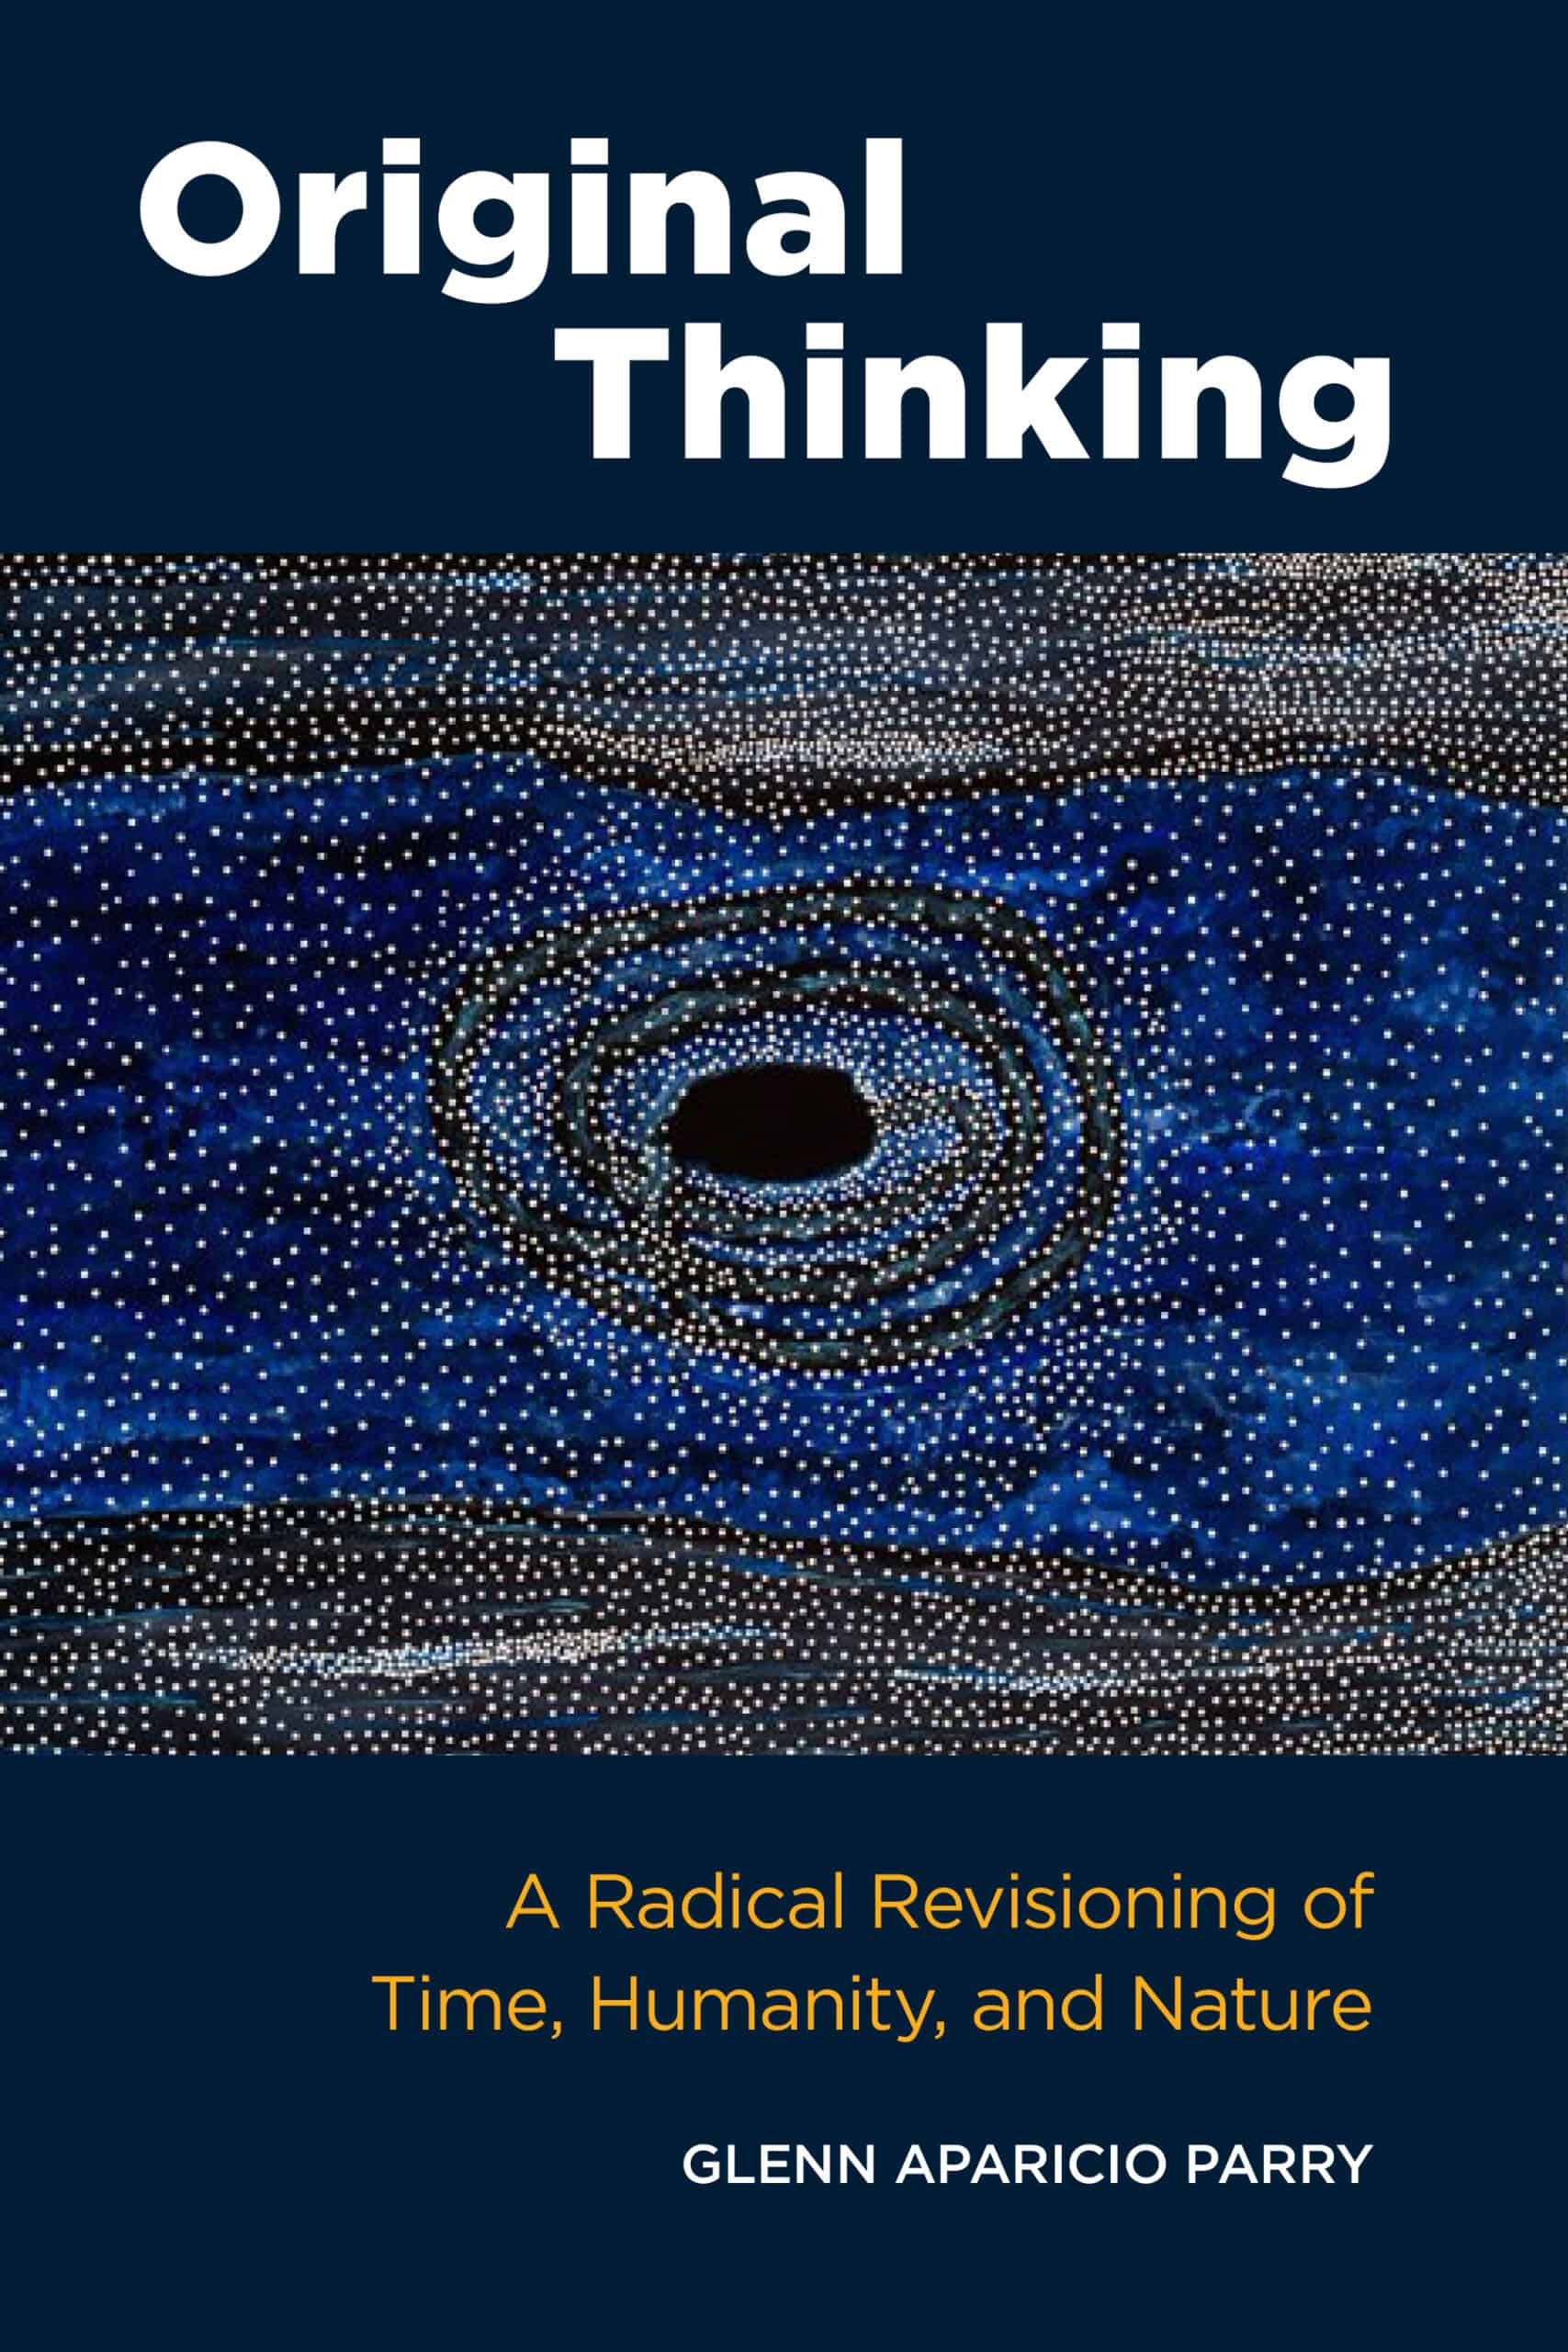 Original Thinking: A Radical Revisioning of Time, Humanity, and Nature ...